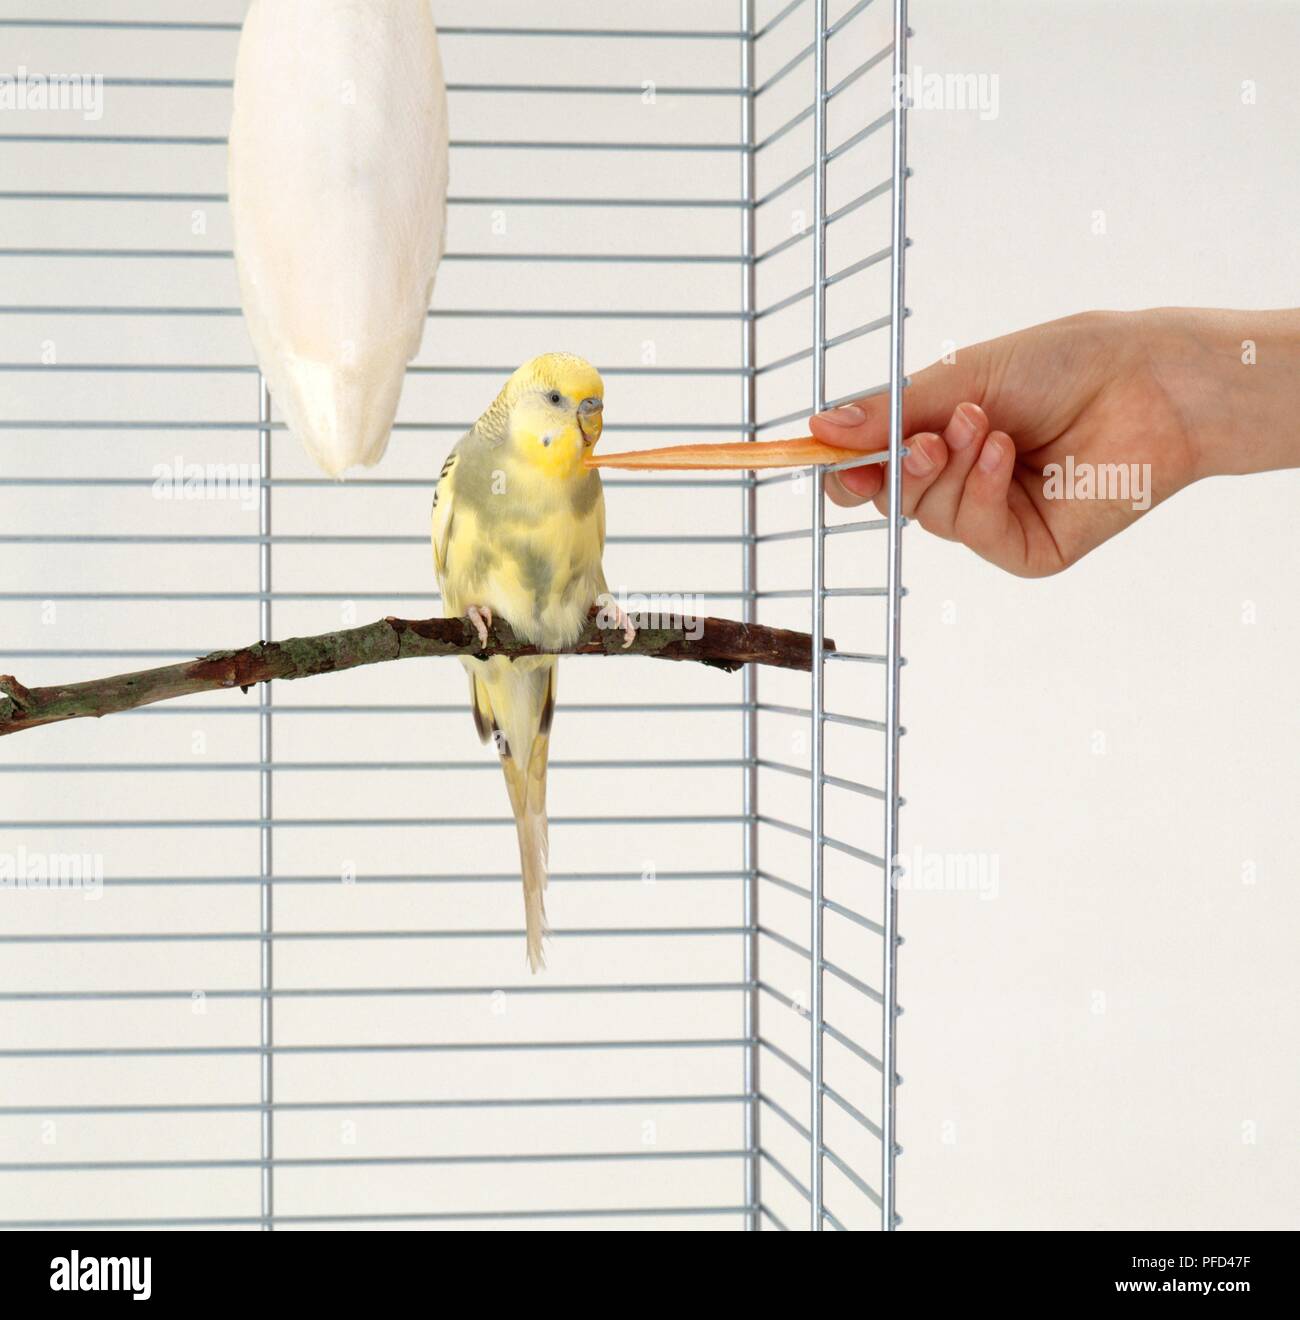 Yellow budgie being hand-fed through metal bars of cage, cuttlefish bone hanging nearby Stock Photo